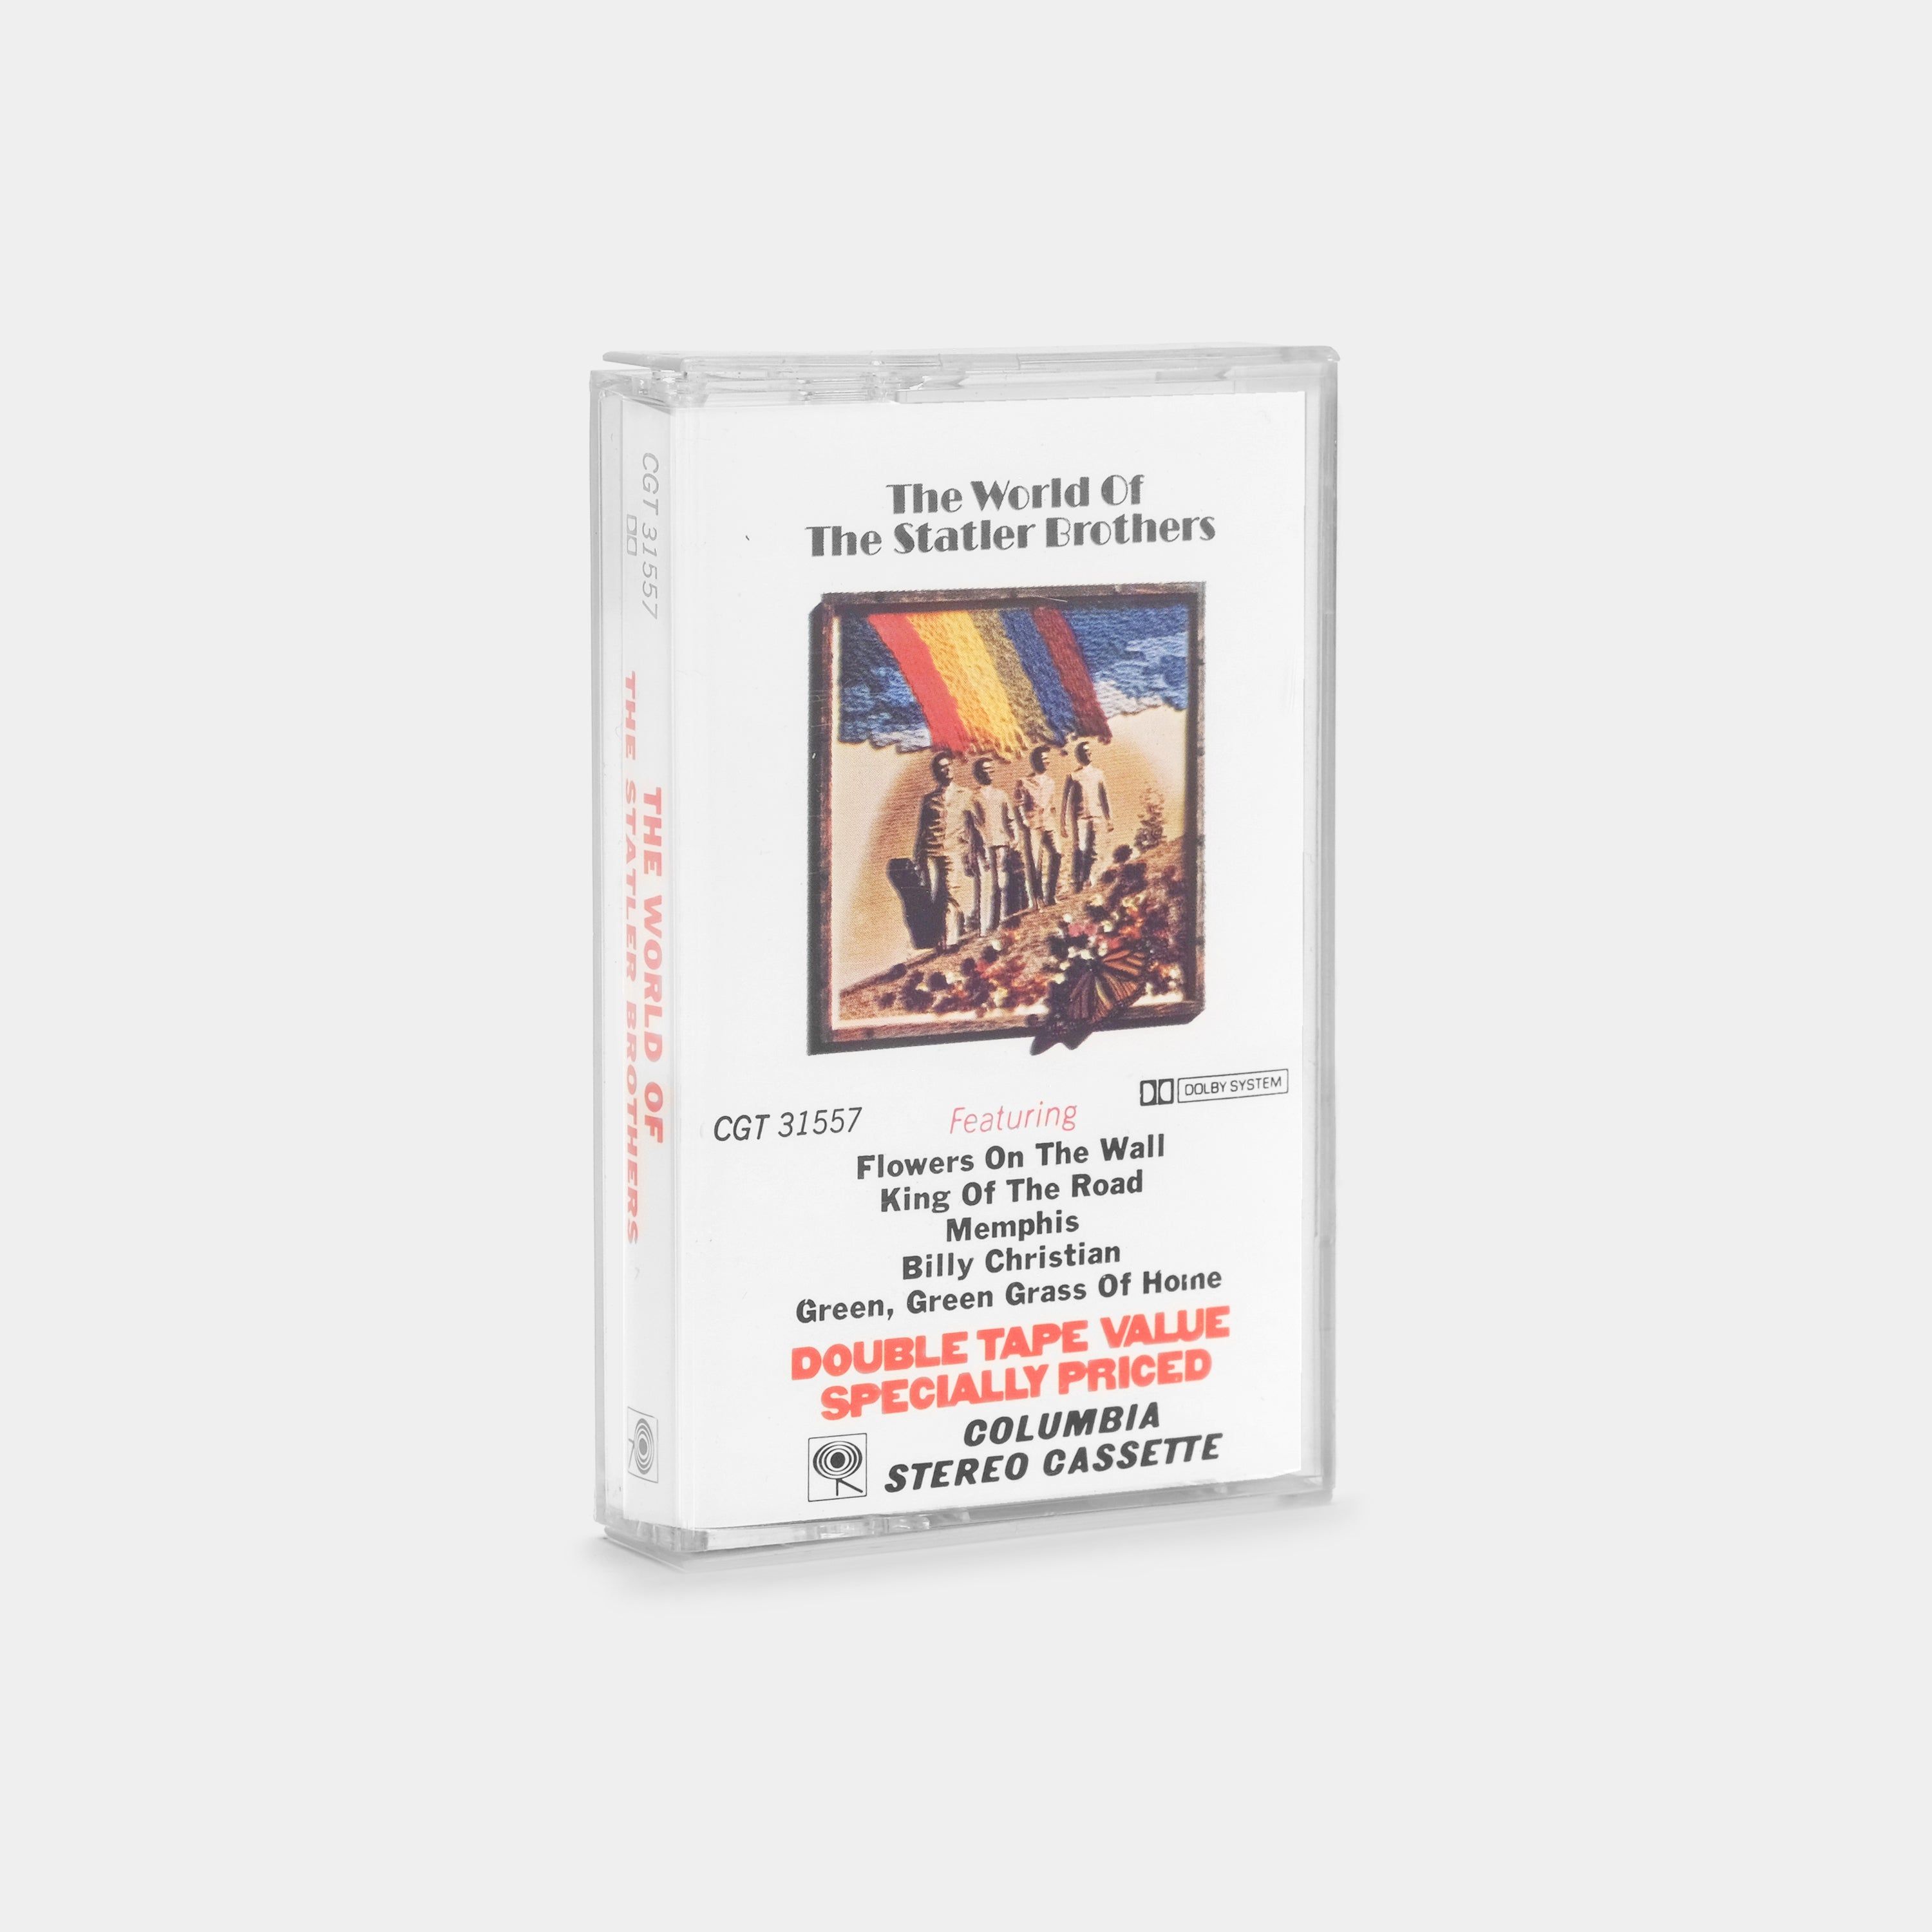 The Statler Brothers - The World Of The Statler Brothers Cassette Tape